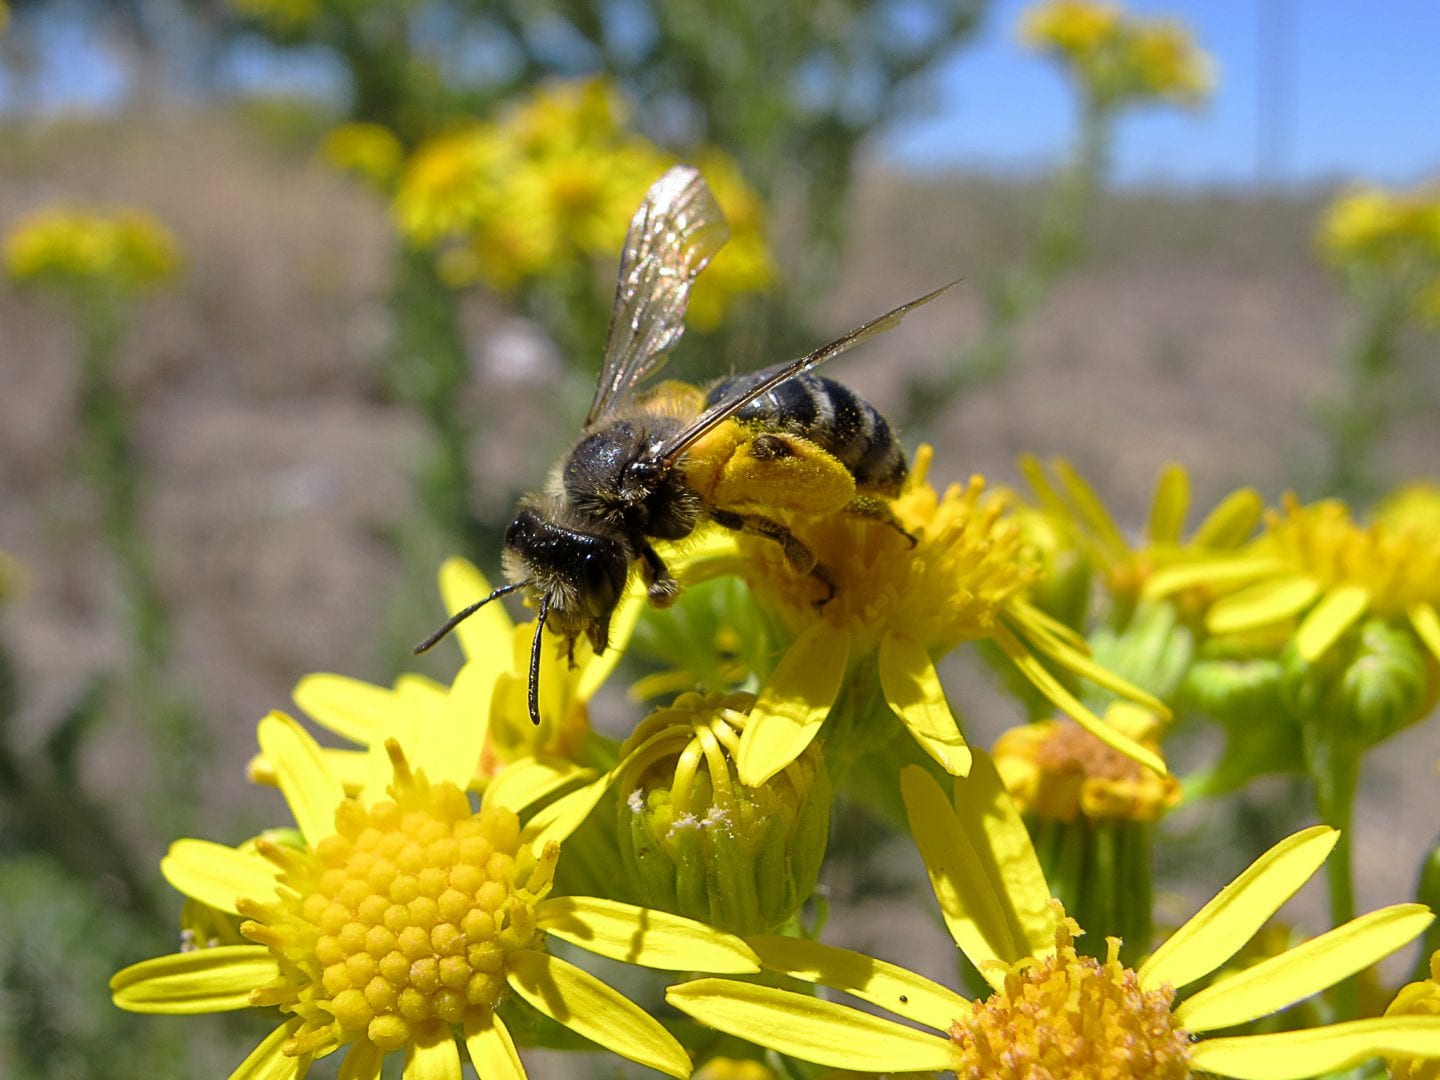 Scopa packed with pollen on a mining bee. — AskNature